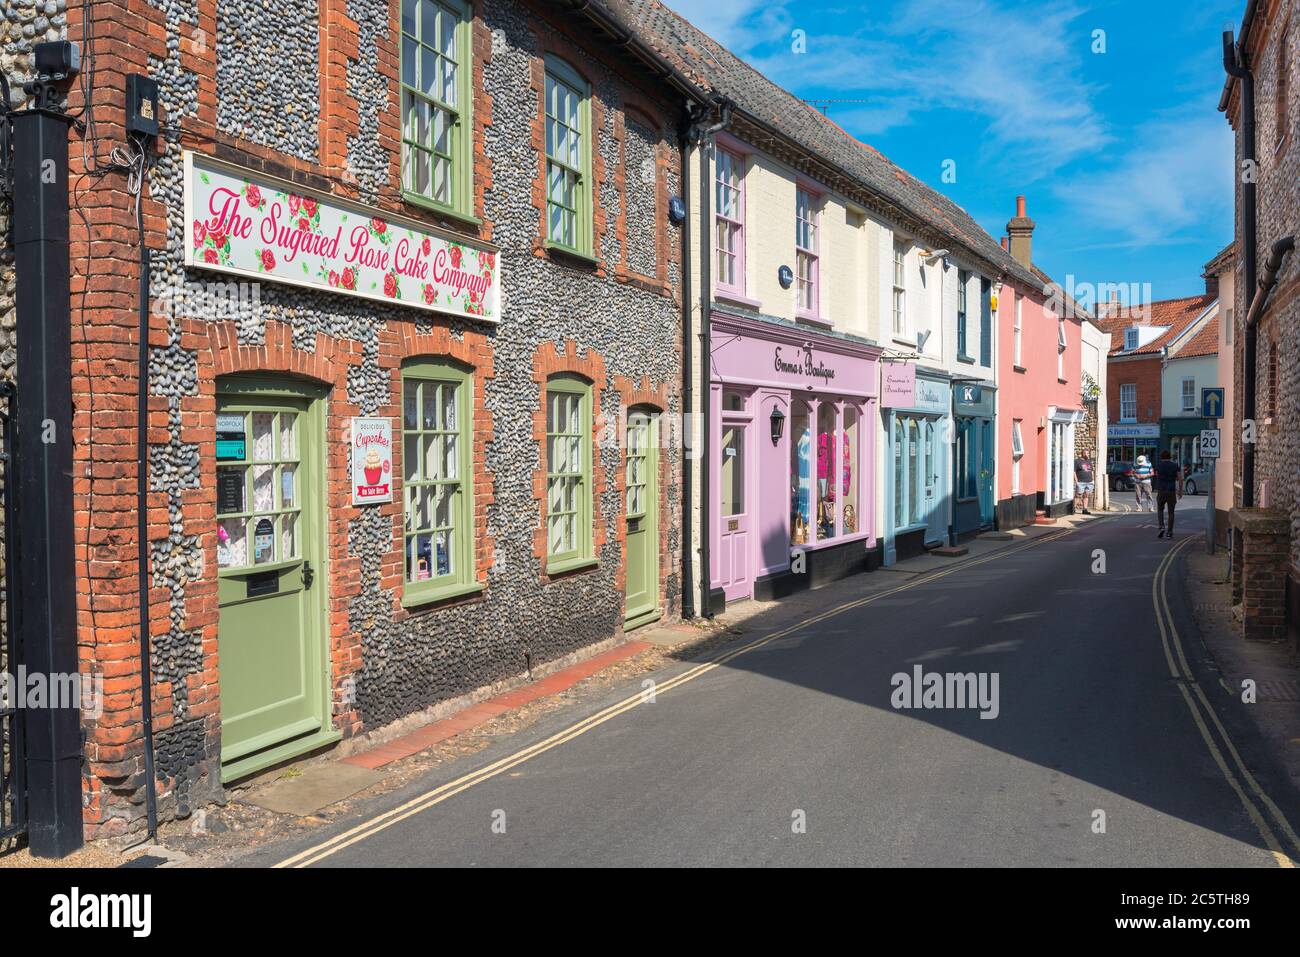 Holt shops, view of a row of bijou shops in Albert Street in the centre of Holt village, Norfolk, East Anglia, England UK Stock Photo